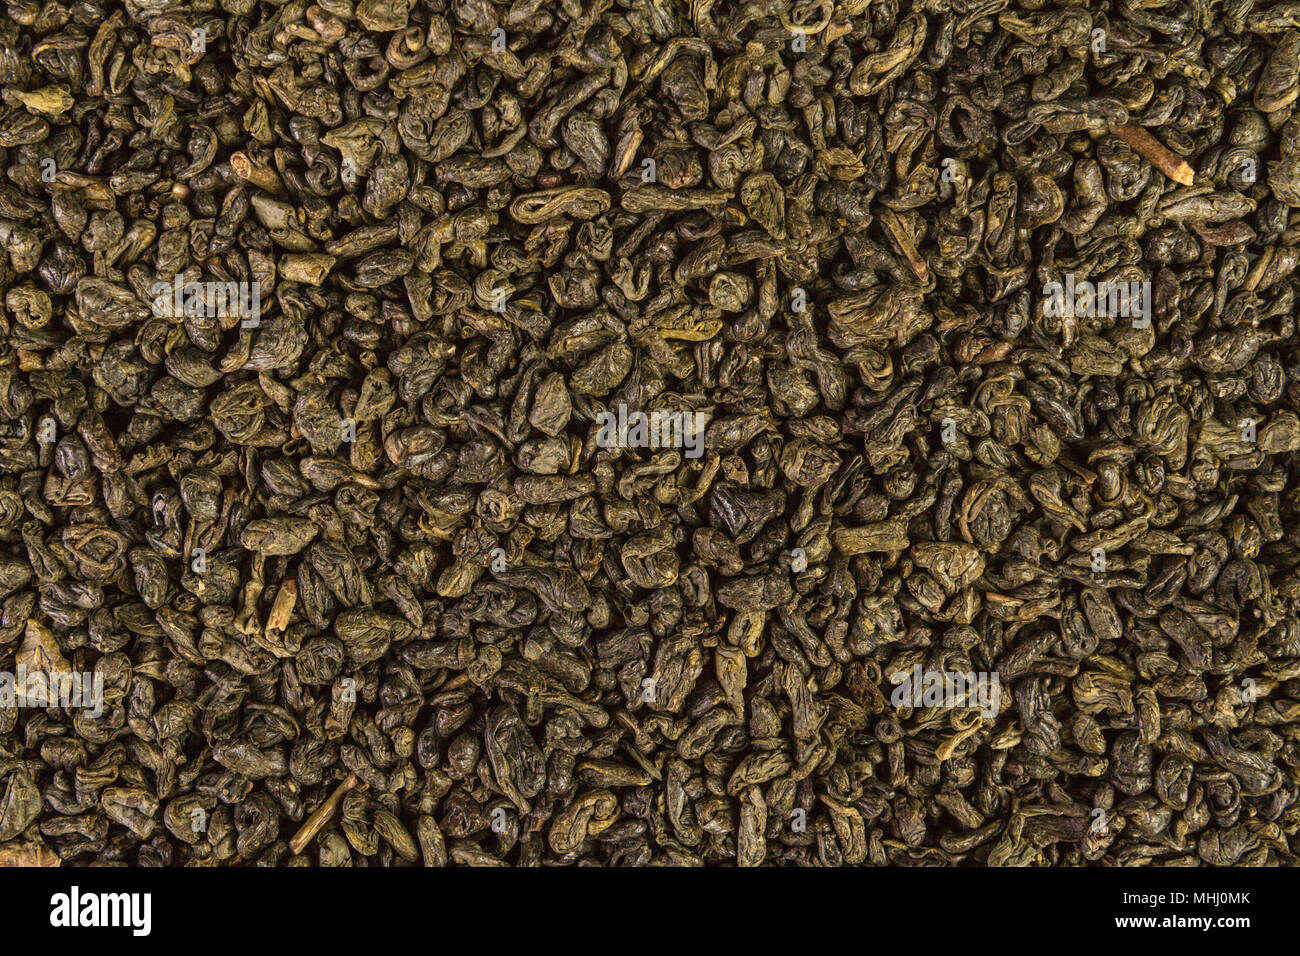 Dried leaves of green chinese gunpowder tea full frame image backgrounds Stock Photo